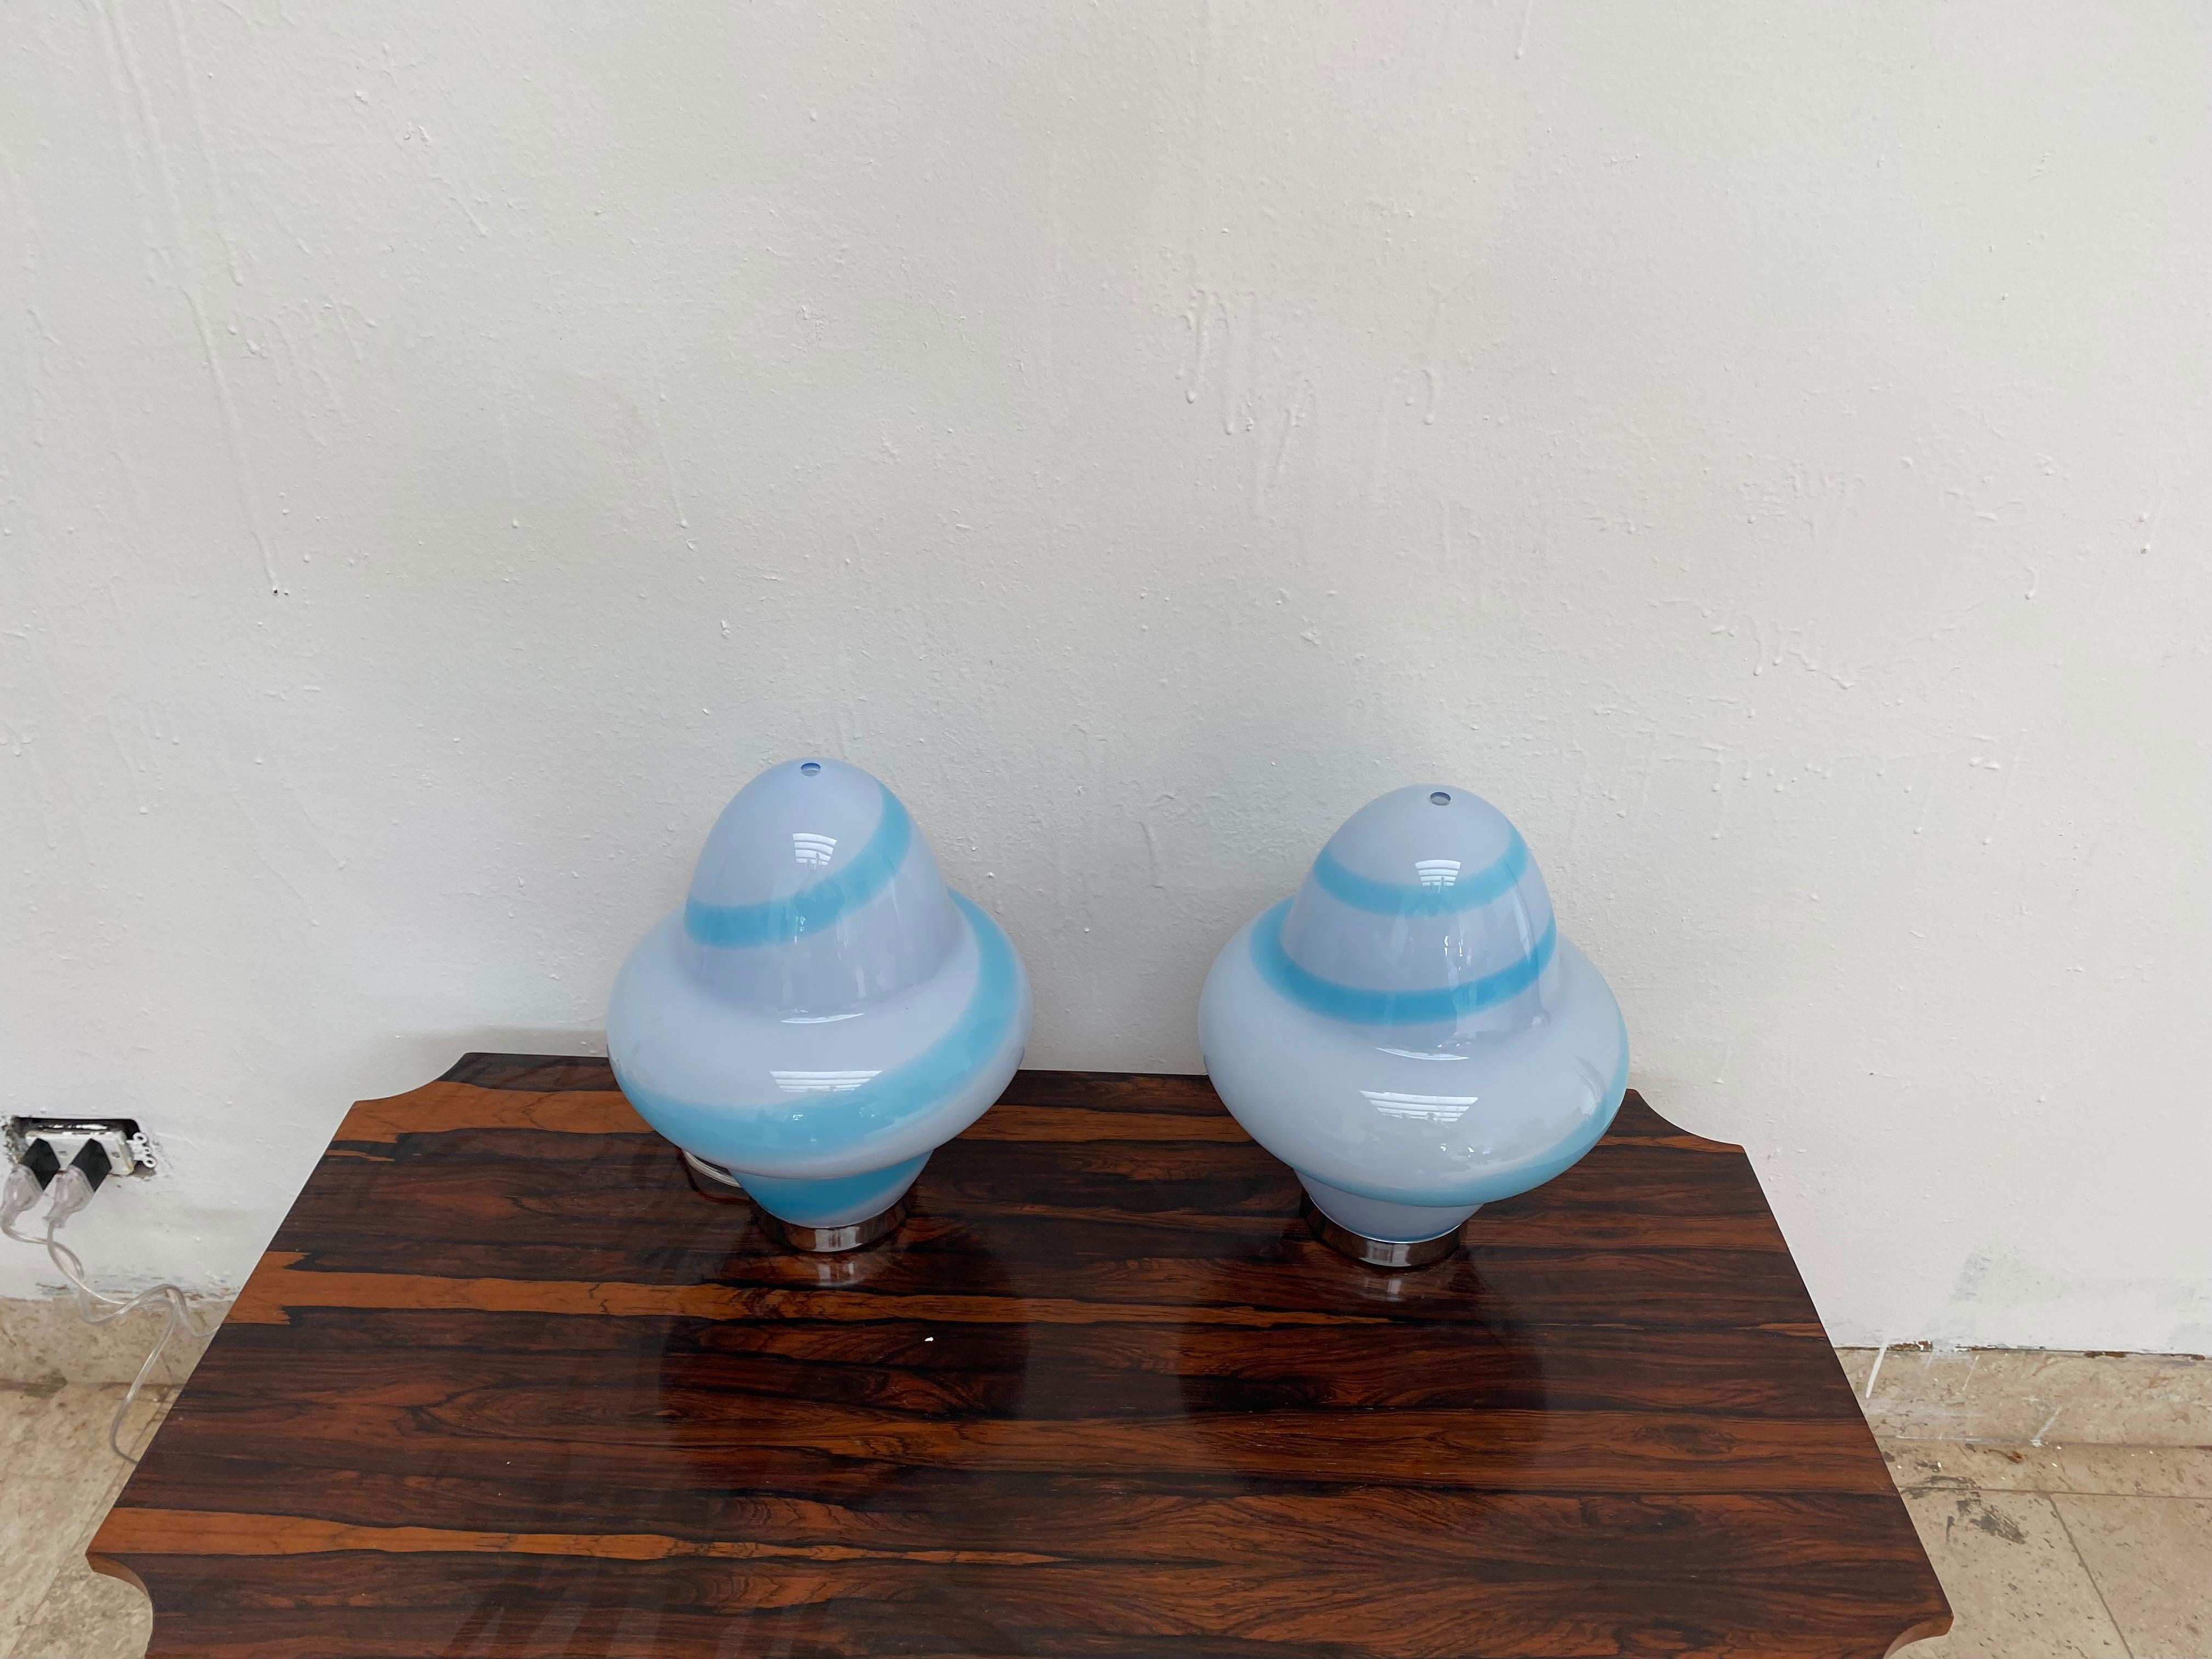 Italian Two Modern Murano Table Lamps by Ettore Sottsass for Venini, Signed ca. 1994 For Sale